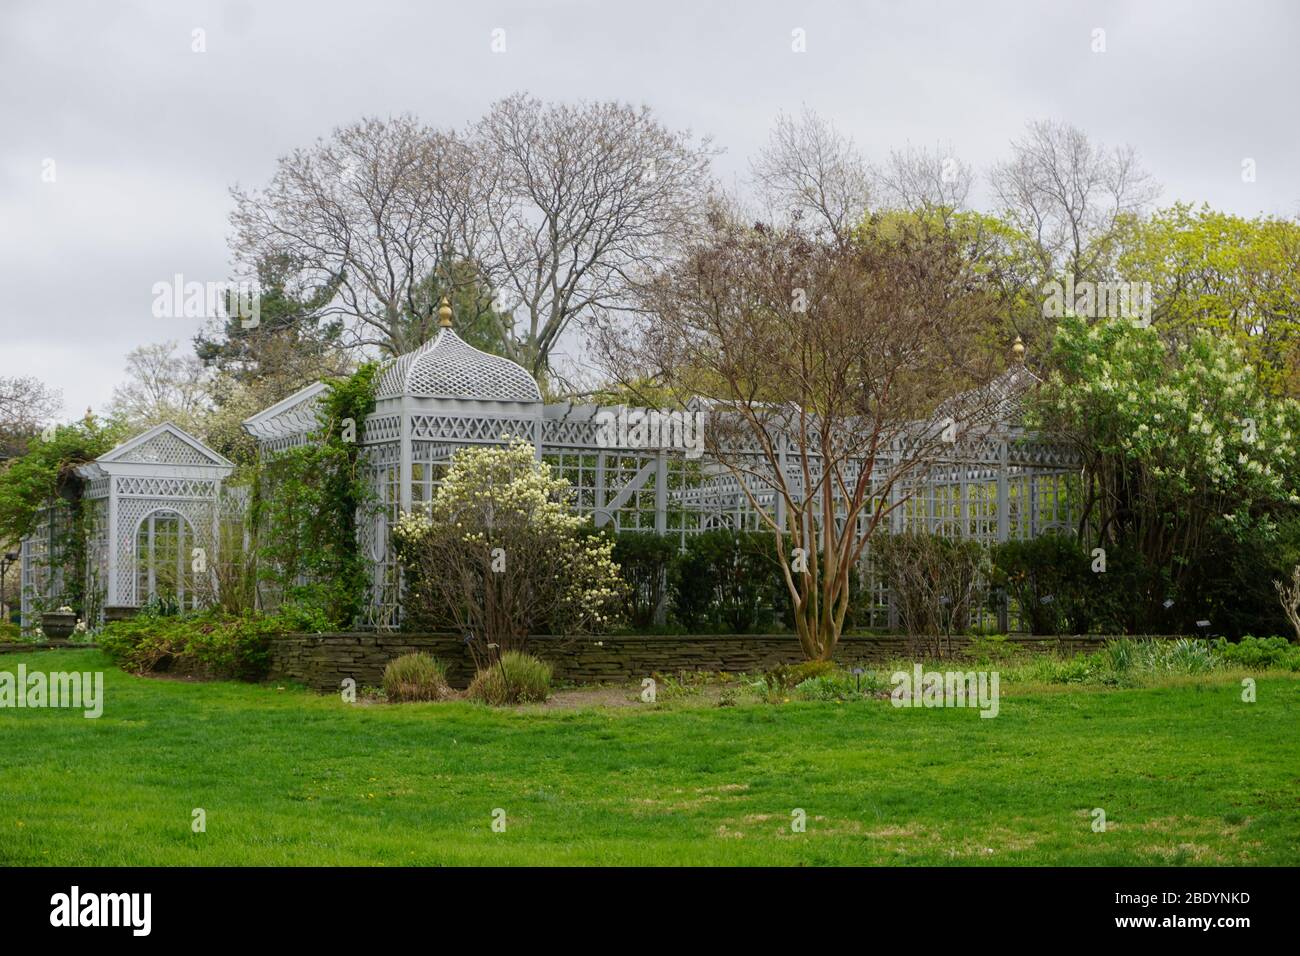 https://c8.alamy.com/comp/2BDYNKD/staten-island-new-york-usa-the-victorian-style-greenhouse-at-the-snug-harbor-cultural-center-and-botanical-garden-2BDYNKD.jpg